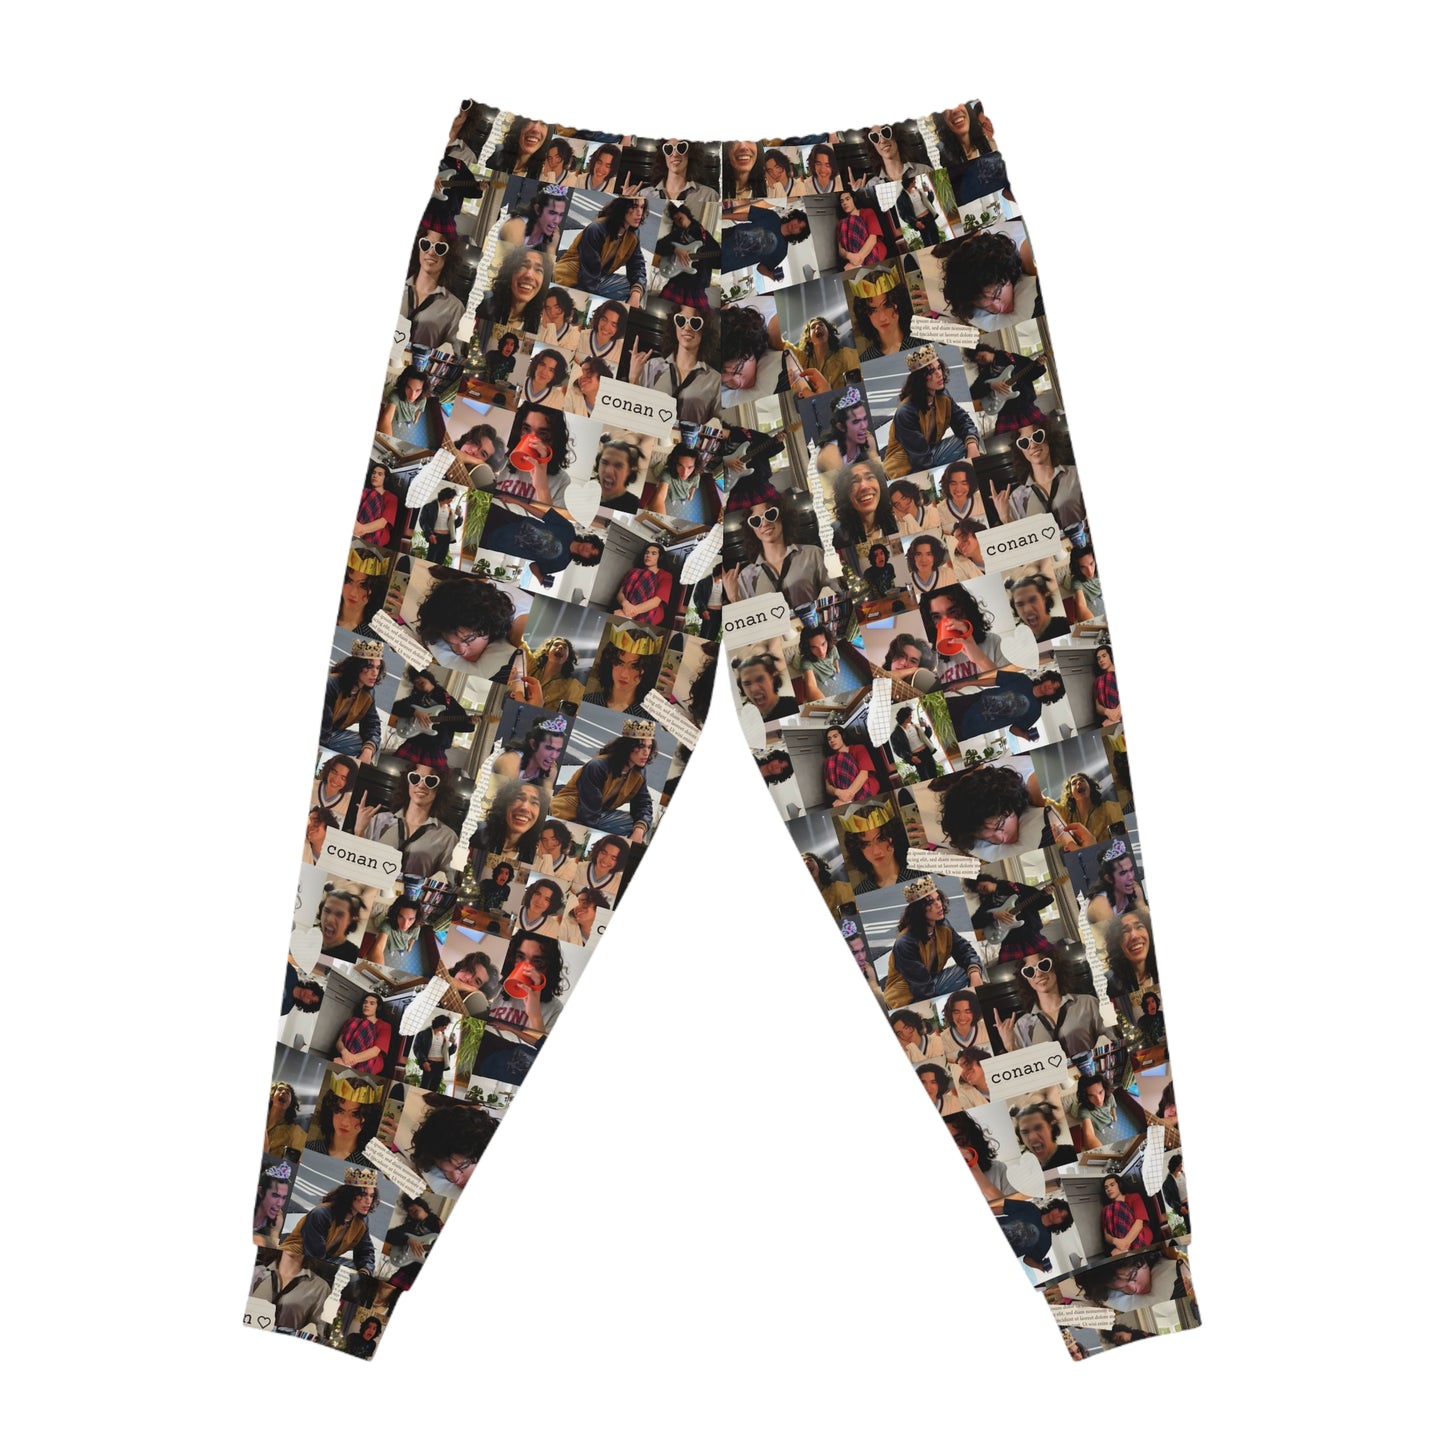 Conan Grey Being Cute Photo Collage Athletic Joggers